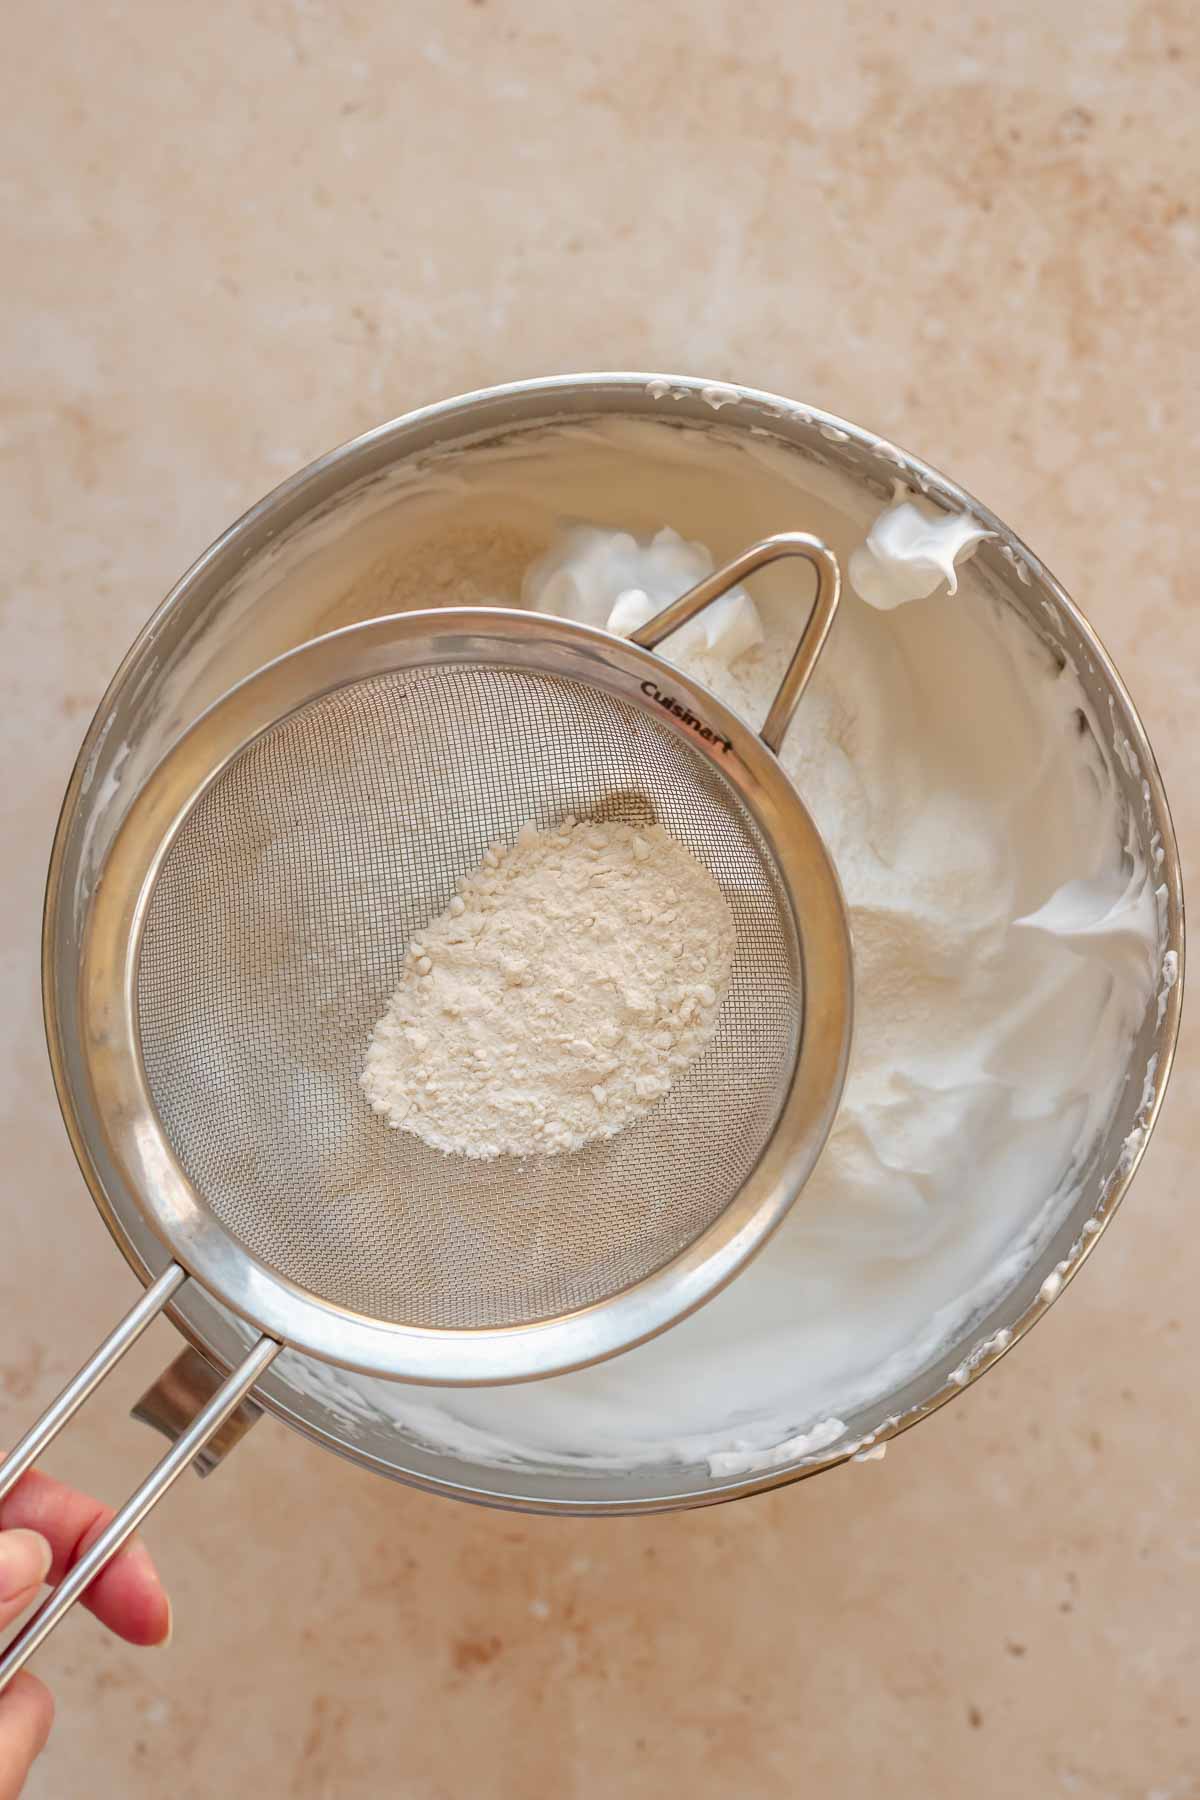 Flour in a sifter going into a bowl of whipped egg whites.